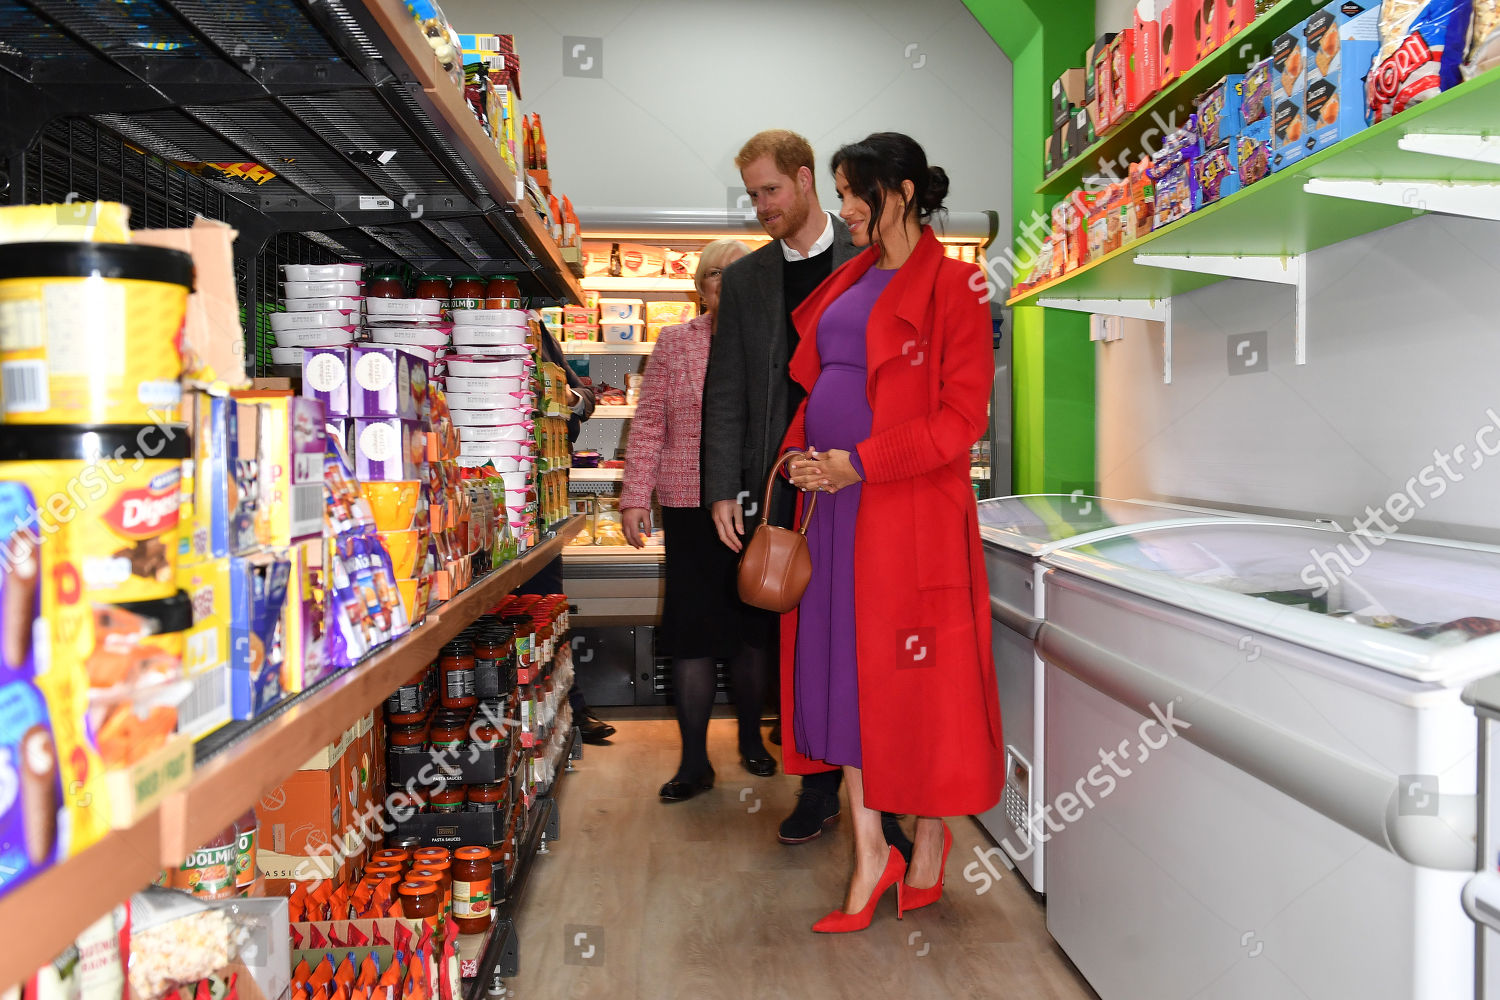 prince-harry-and-meghan-duchess-of-sussex-visit-to-birkenhead-uk-shutterstock-editorial-10056256f.jpg